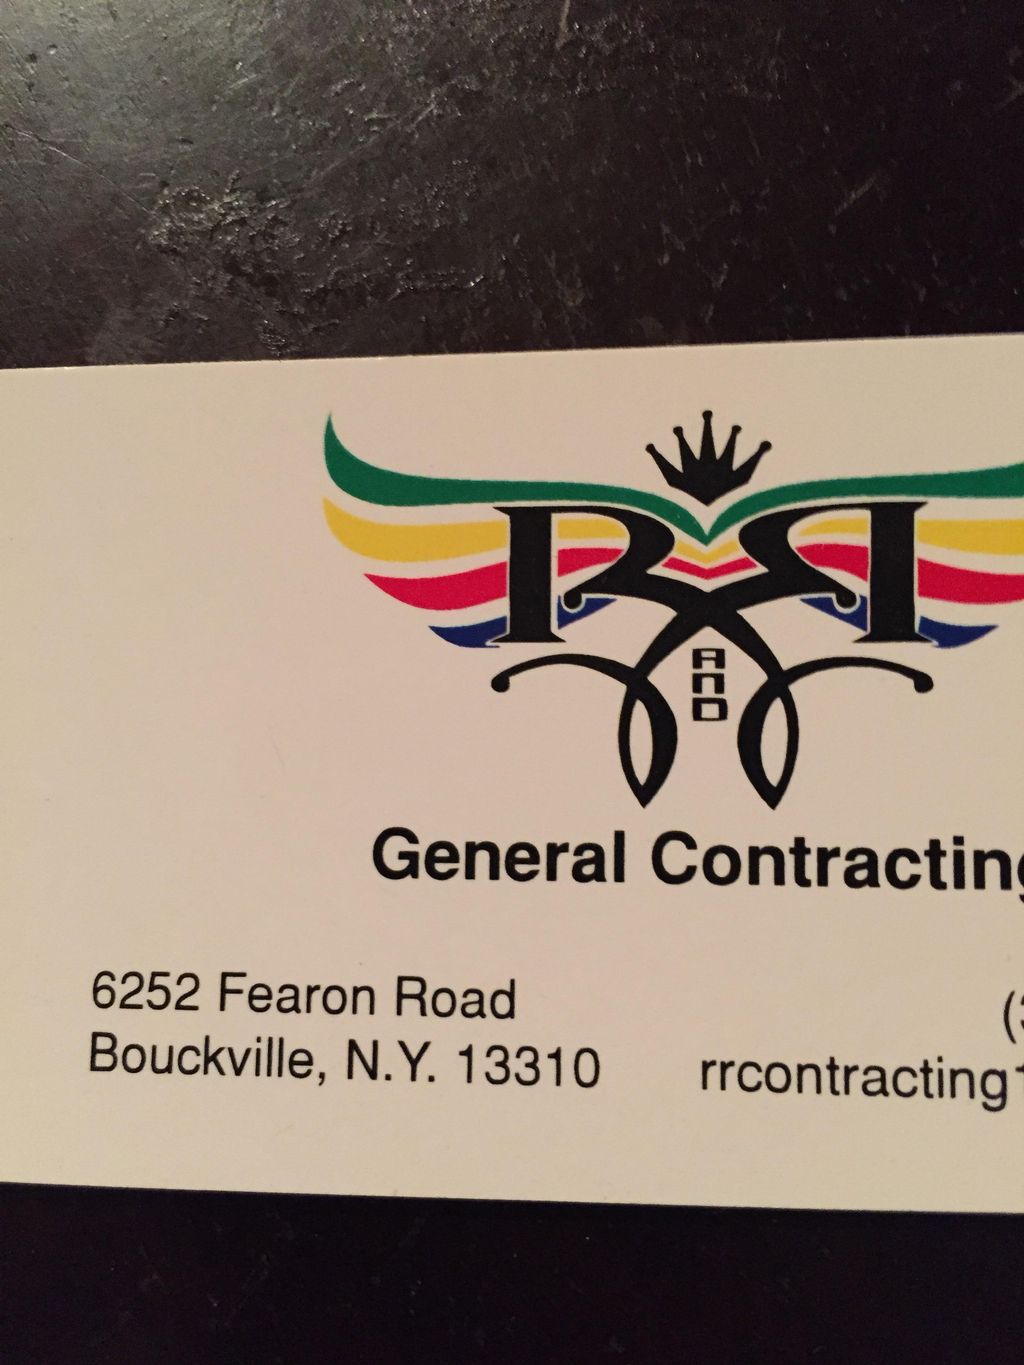 R&R General Contracting